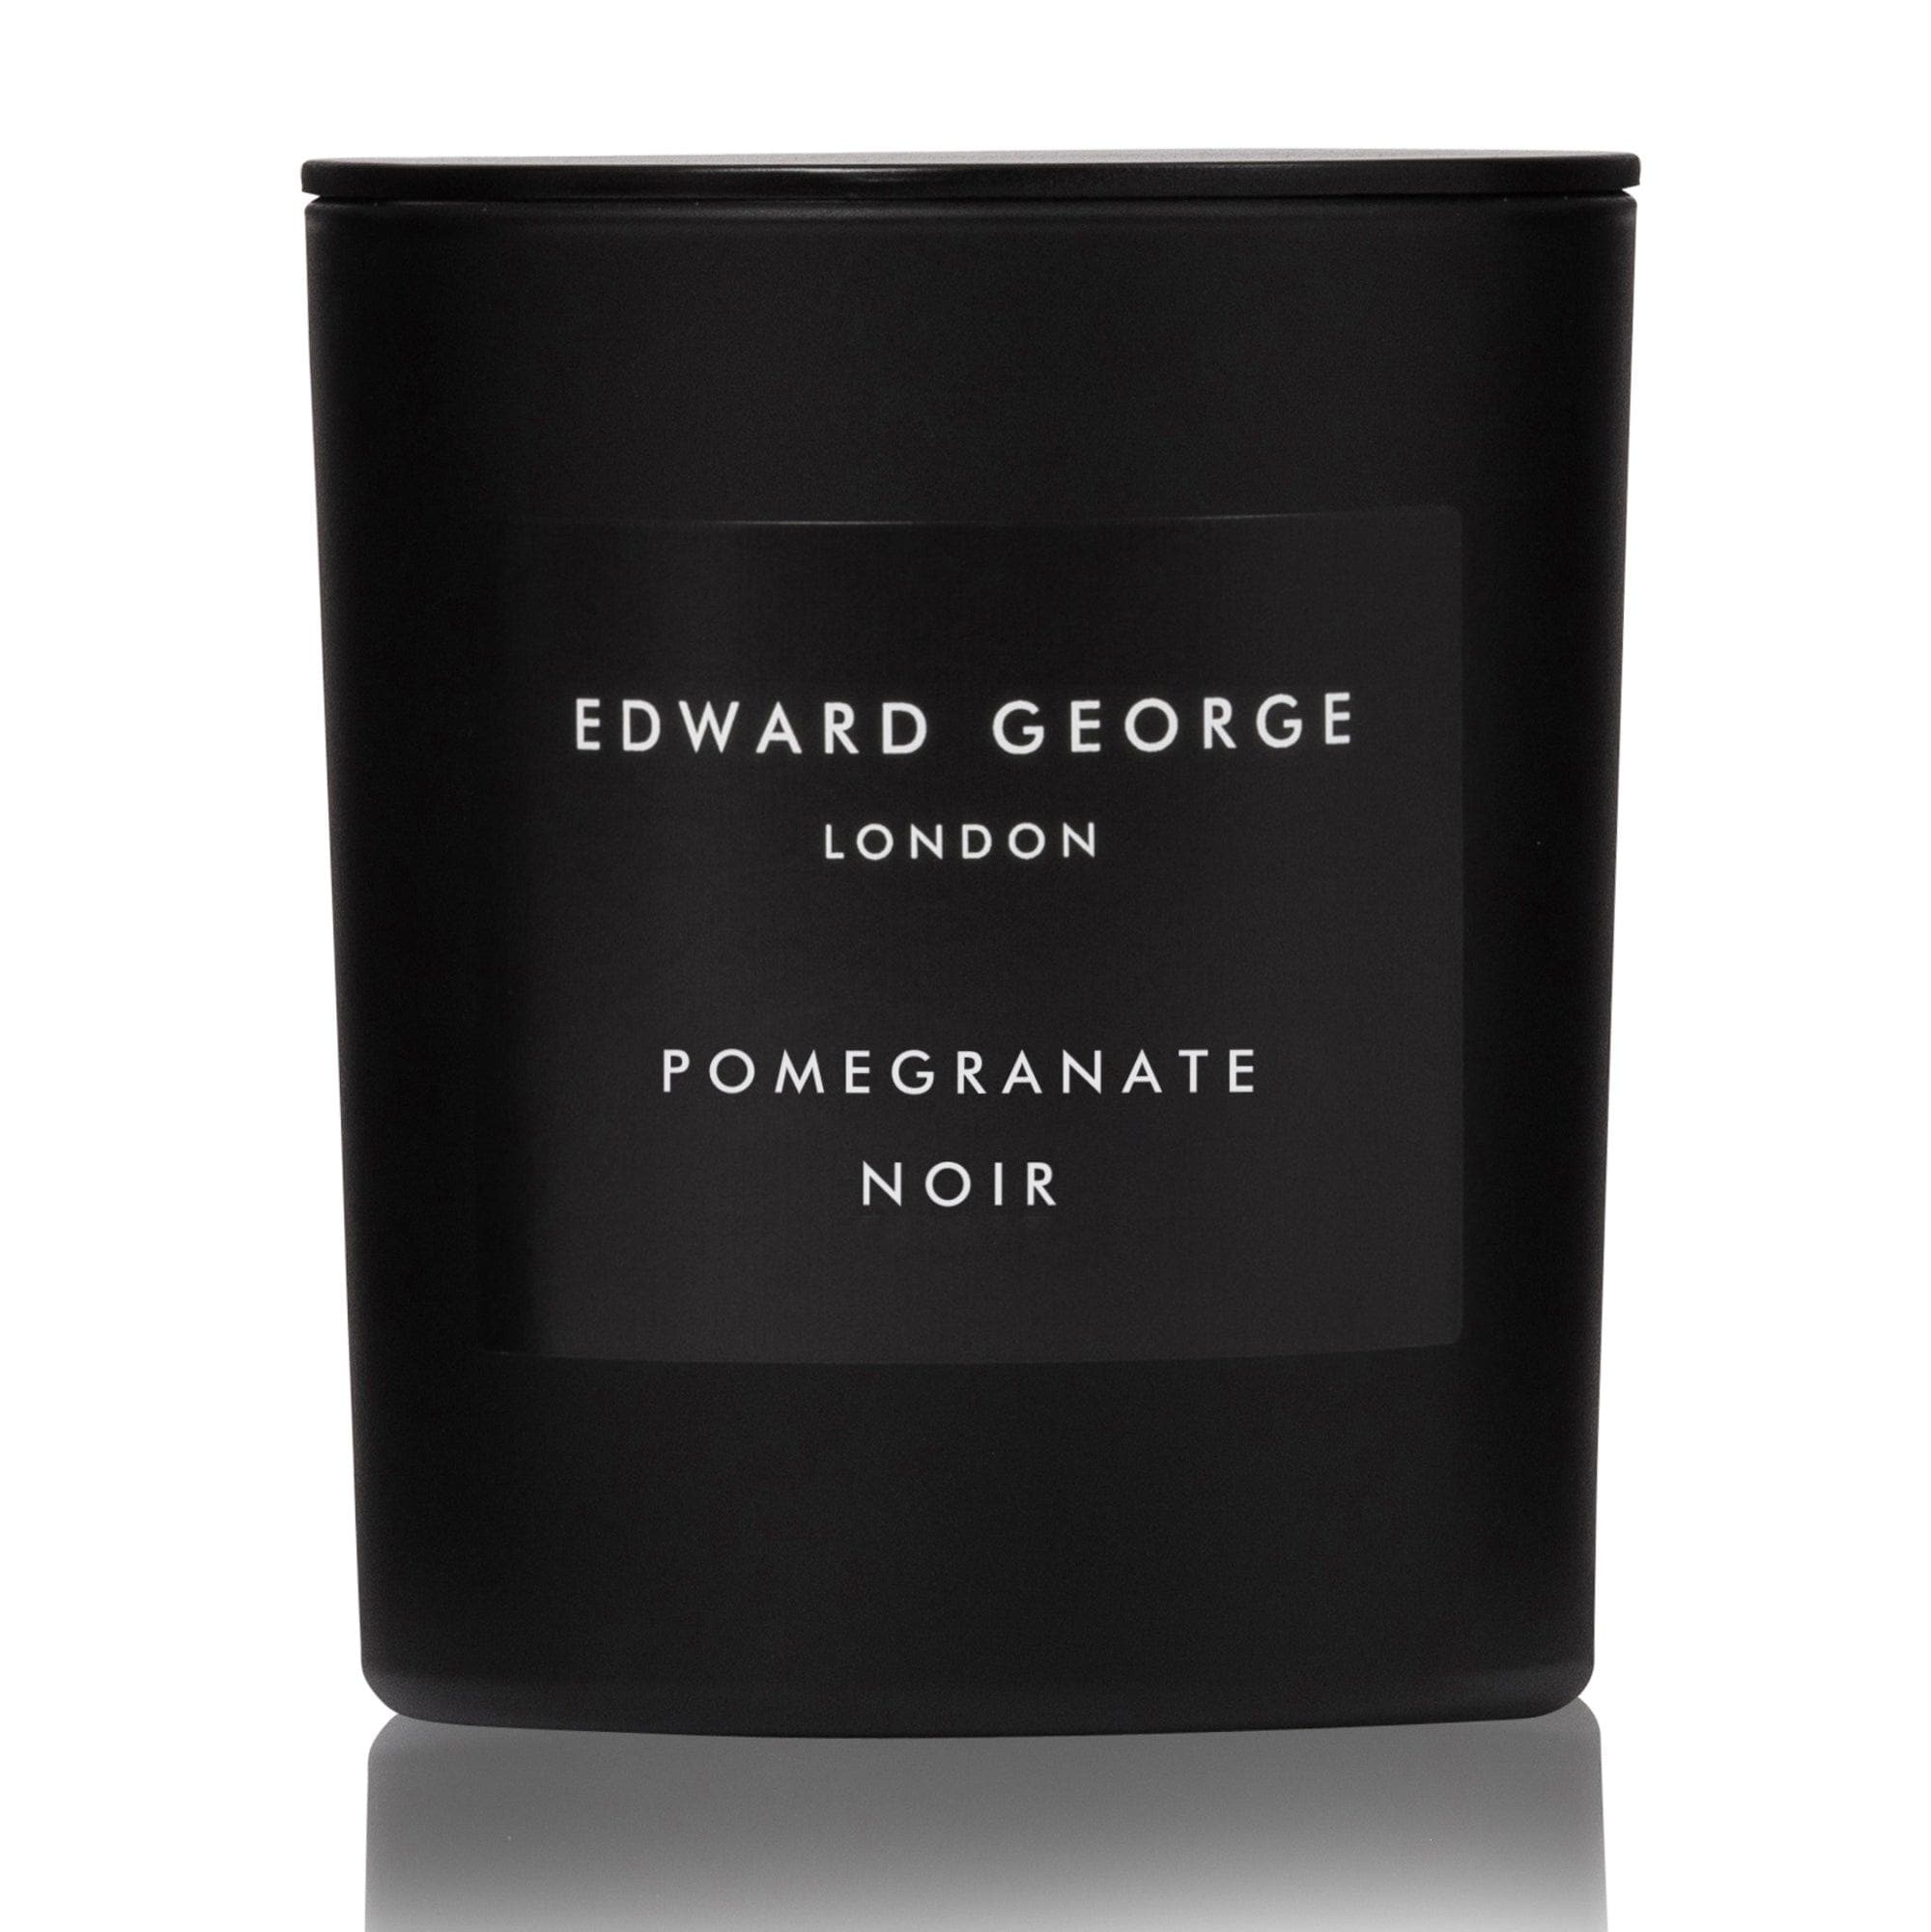 pomegranate noir candles home fragrance decor room living room edward george london luxury gift ritual scent set lid zinc alloy black wax best black scented candle women men small